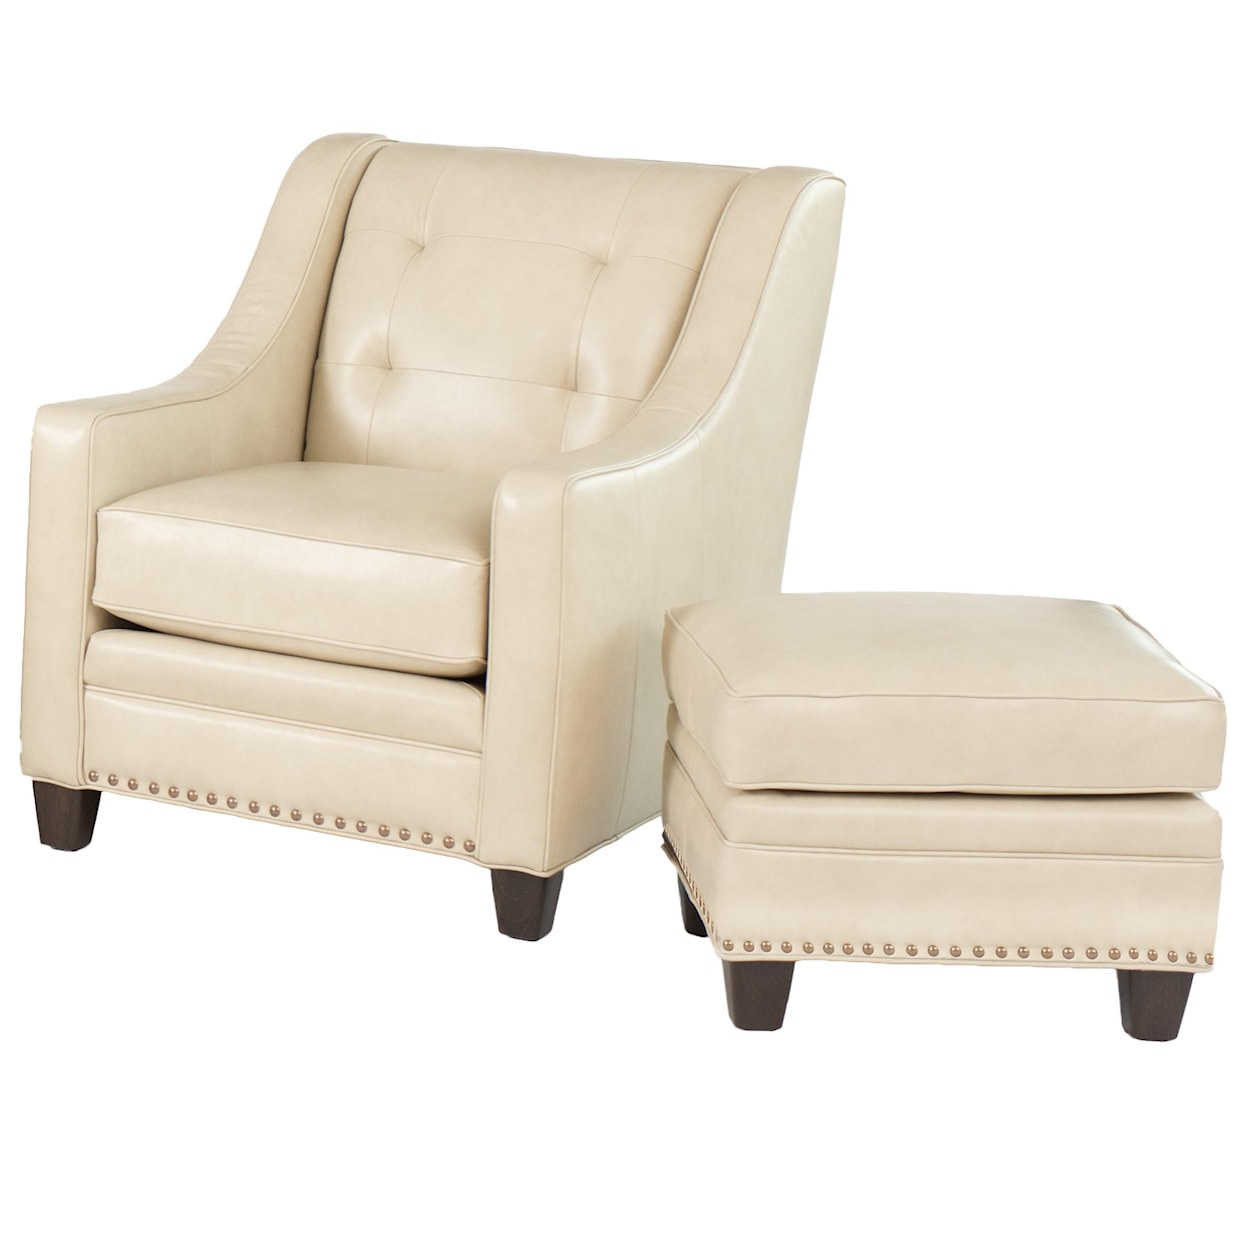 Smith Brothers 203 Transitional Chair with Ottoman